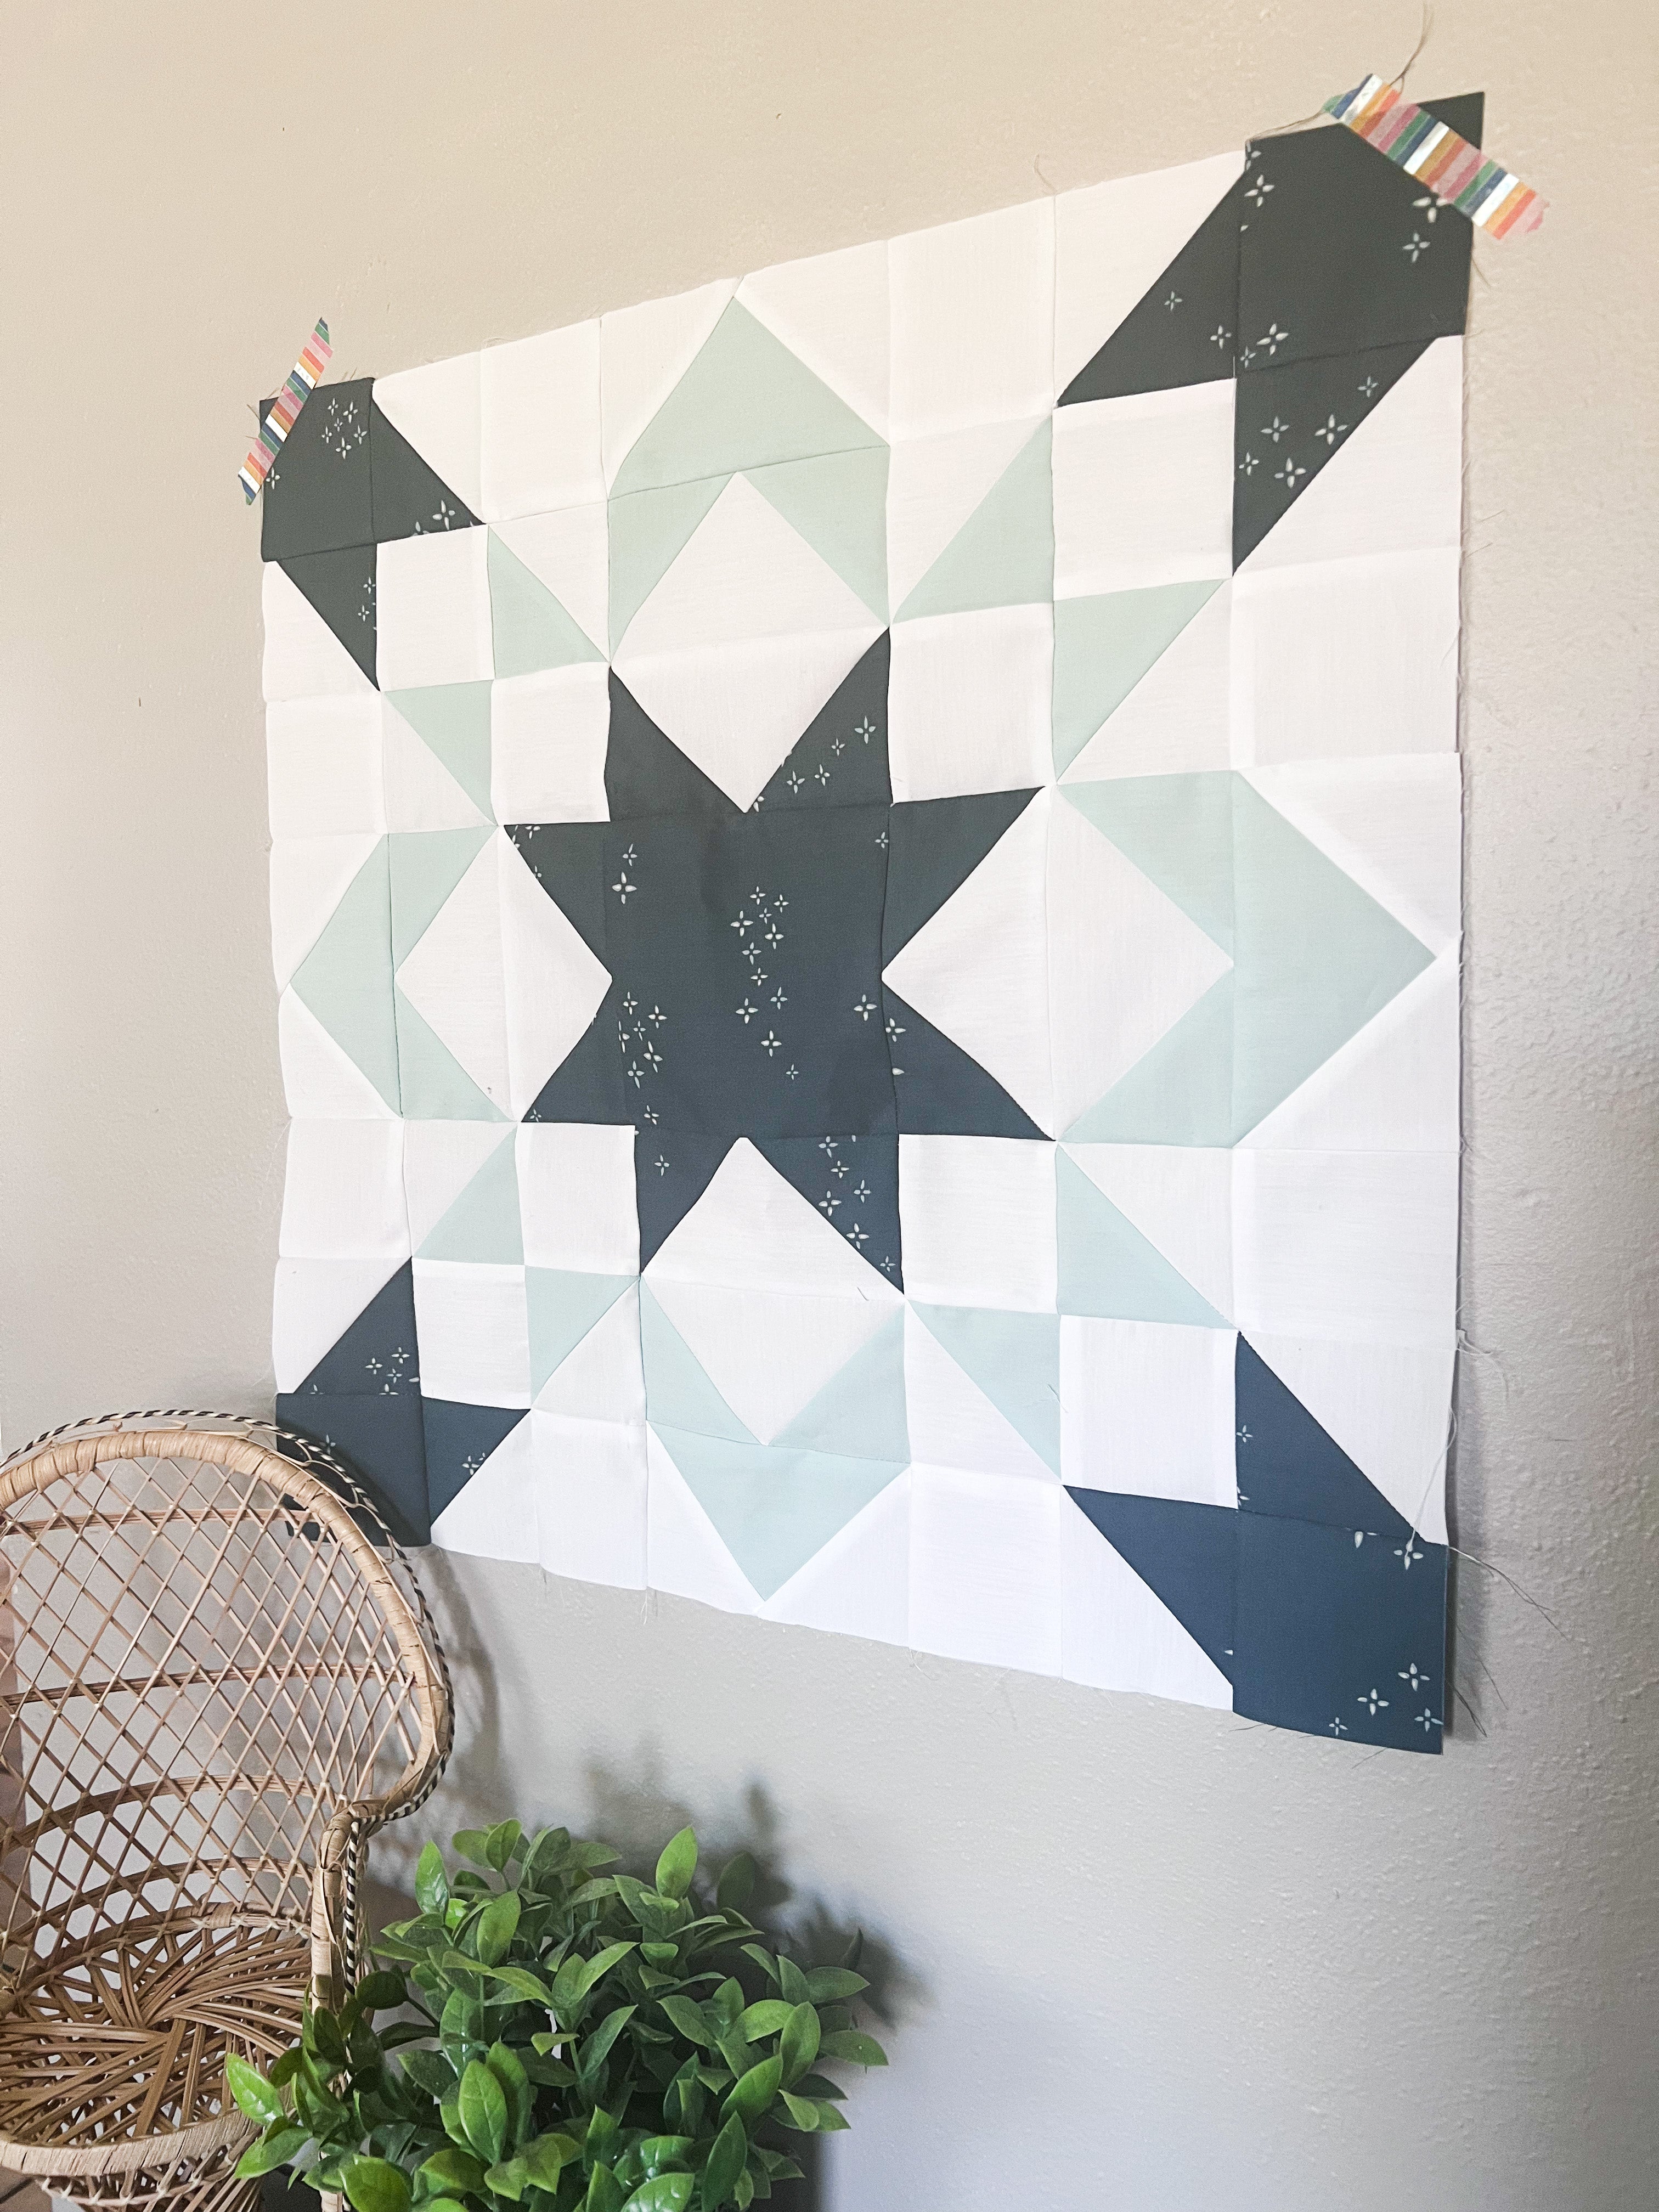 Starly Quilt made by Jessica. A modern but classic sawtooth star block quilt pattern by Cotton and Joy.